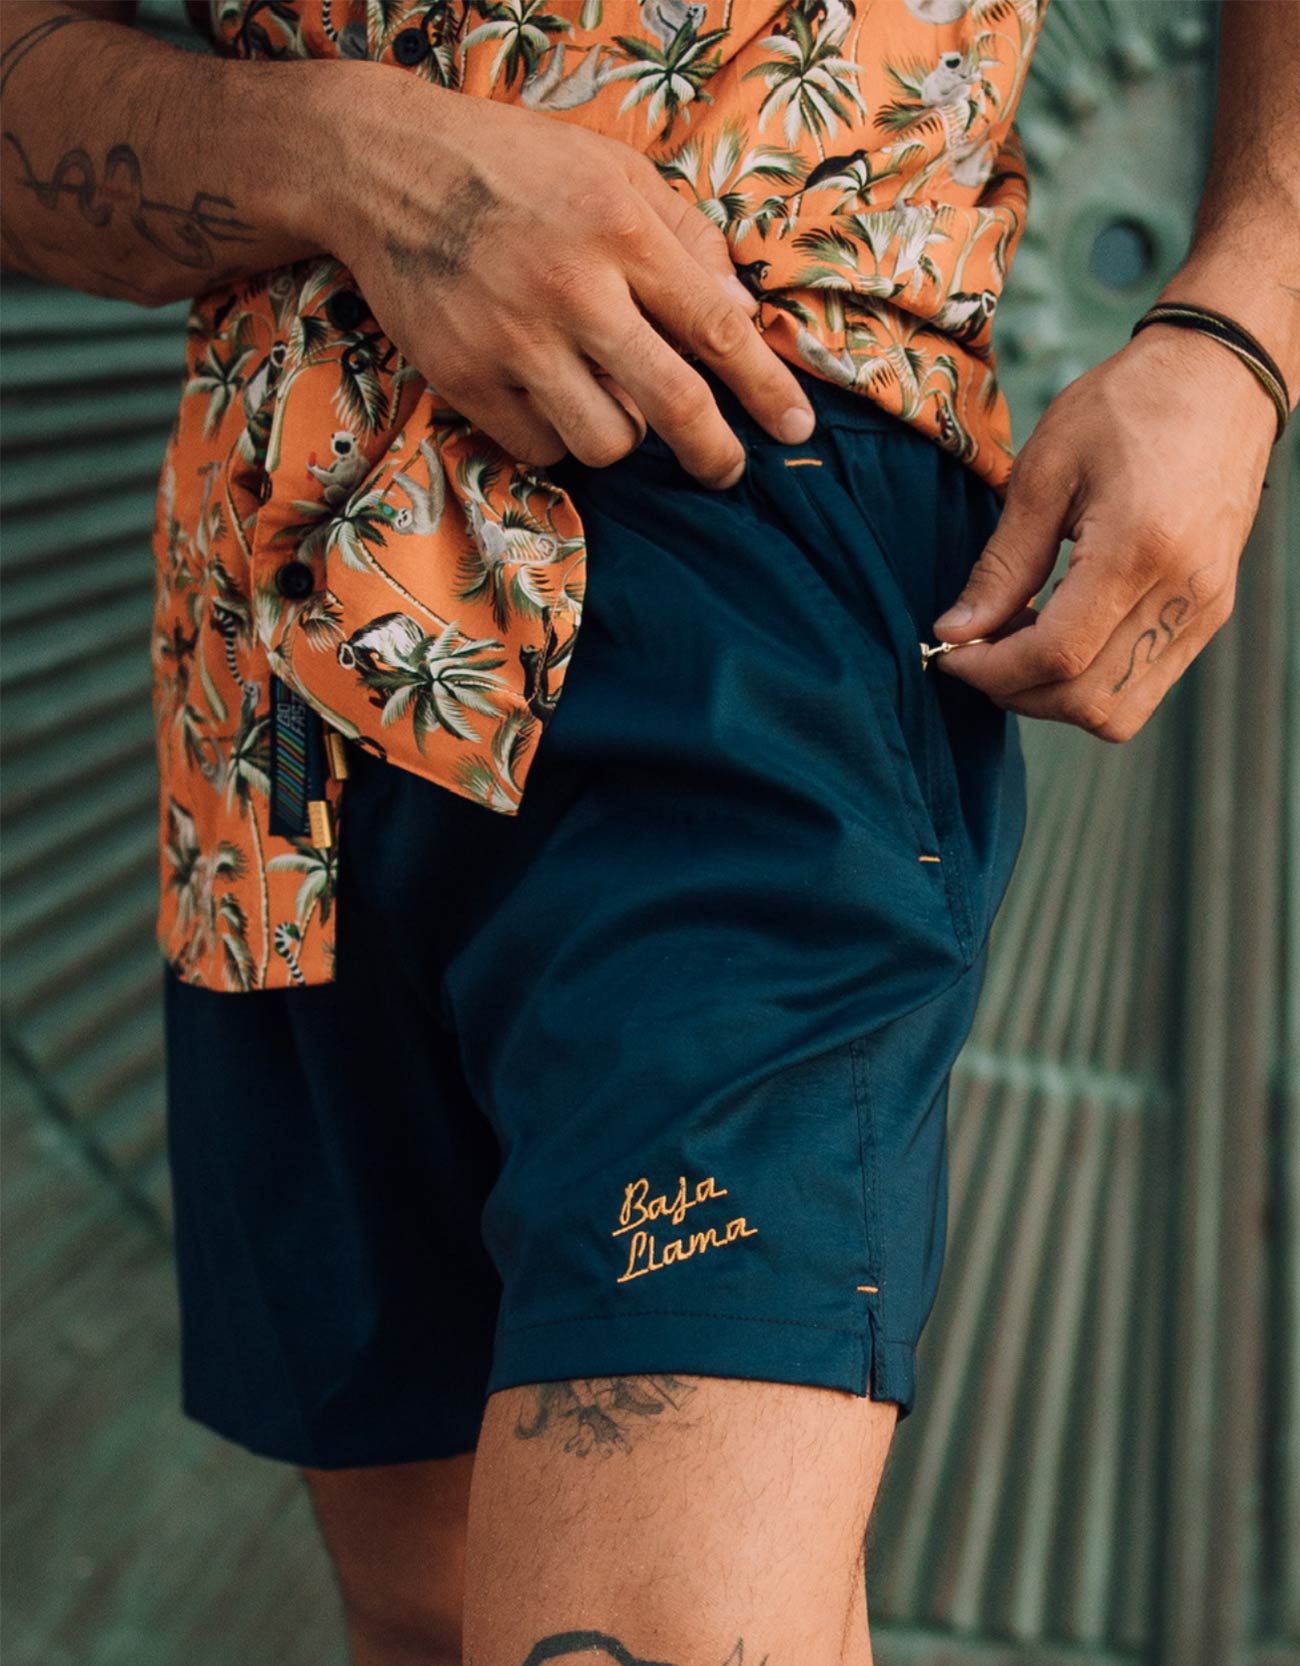 Solid navy men's swimsuit featuring embroidered "Taking Care of Business" slogan and Baja Llama logo.